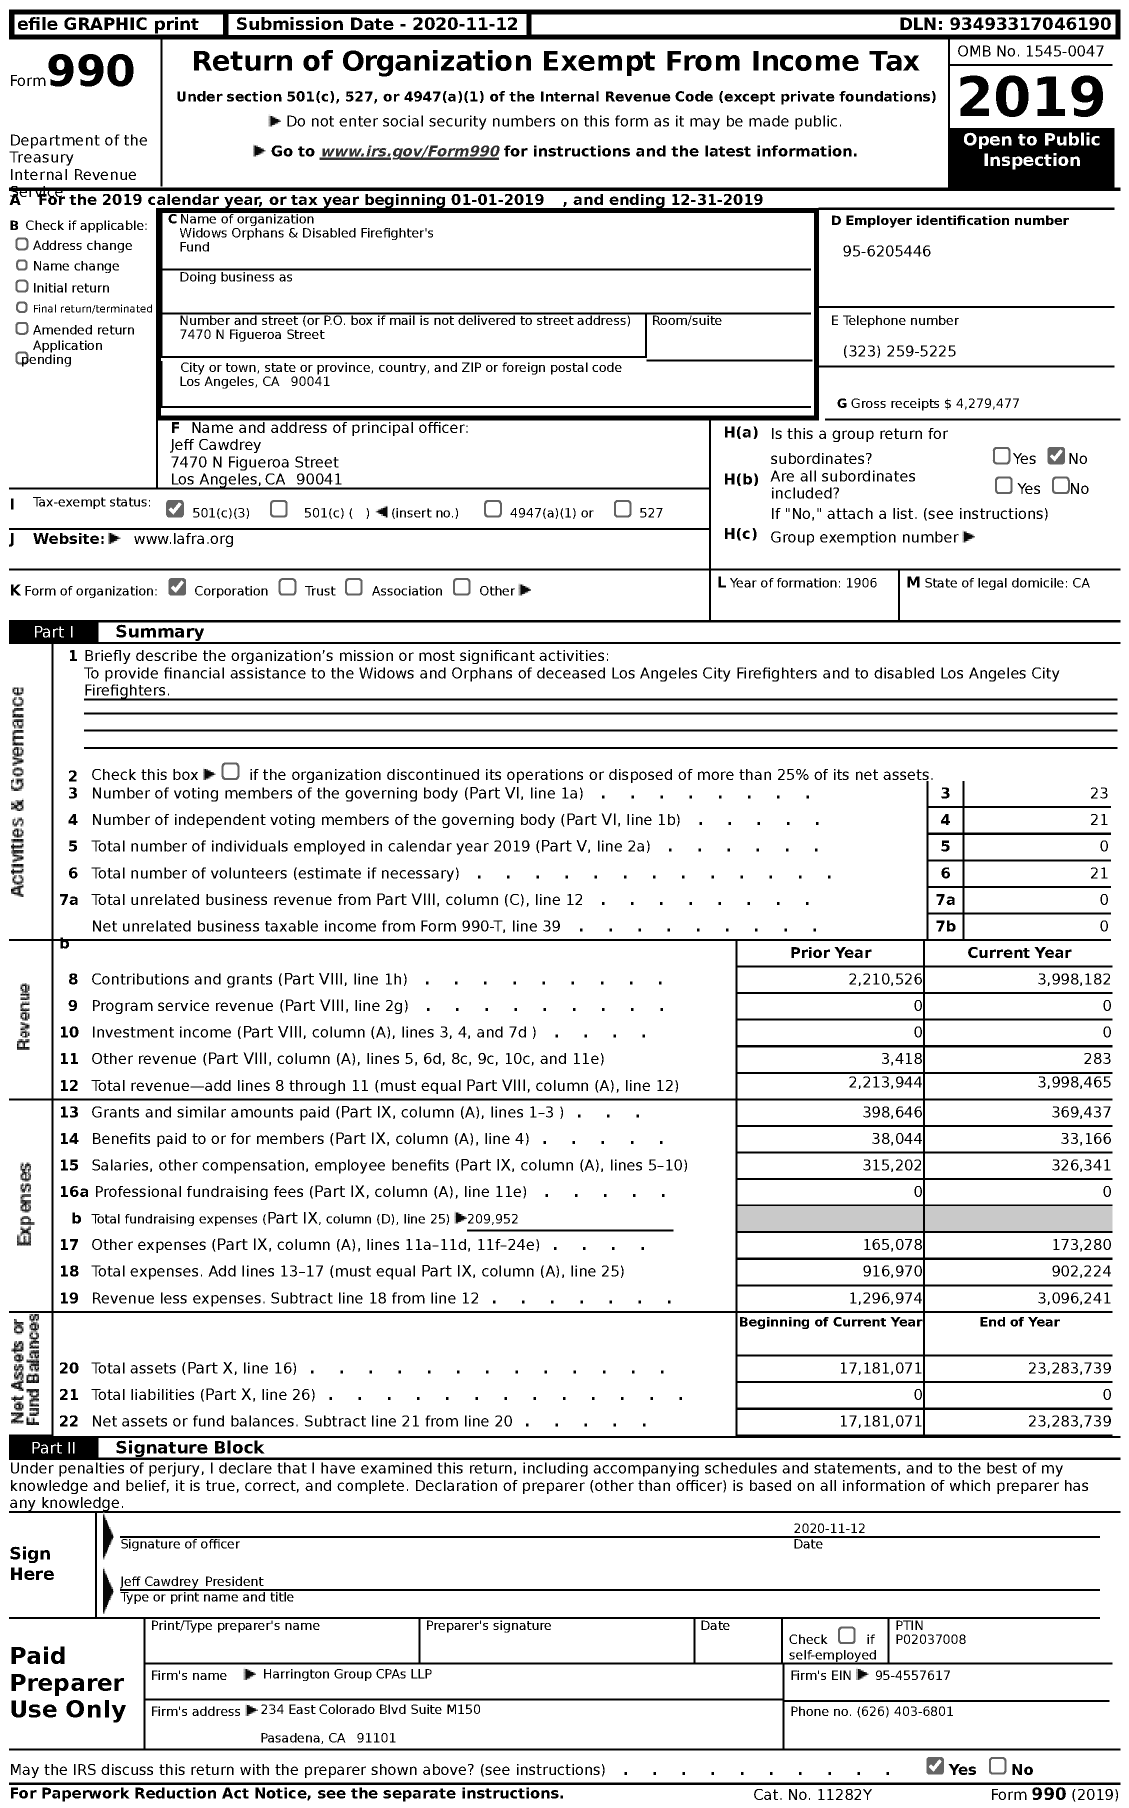 Image of first page of 2019 Form 990 for Widows Orphans & Disabled Firefighter's Fund